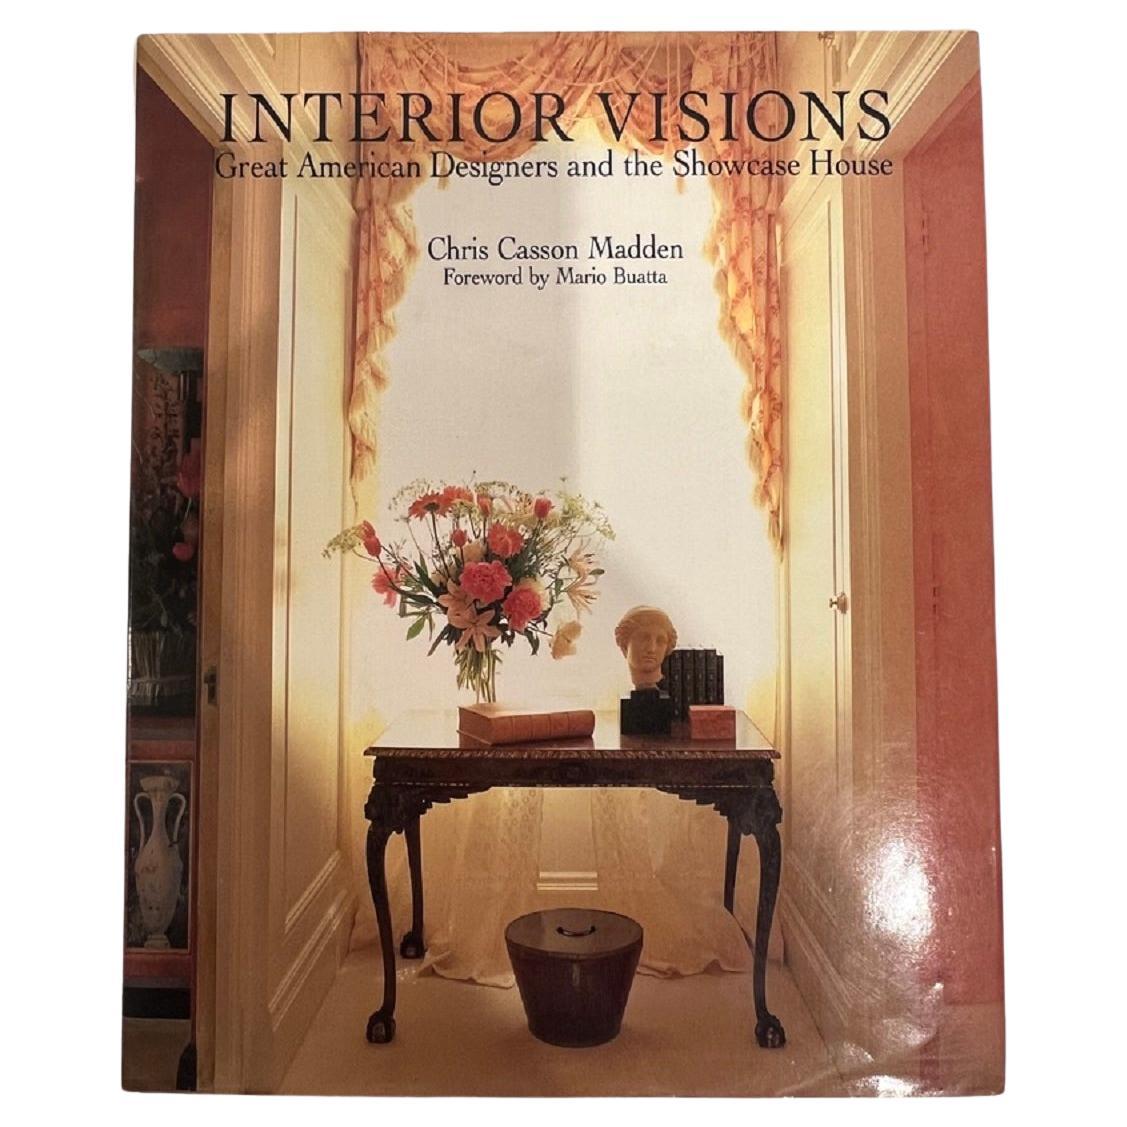 Interior Visions Great American Designers by Chris Casson Madden Hardcover 1988 For Sale